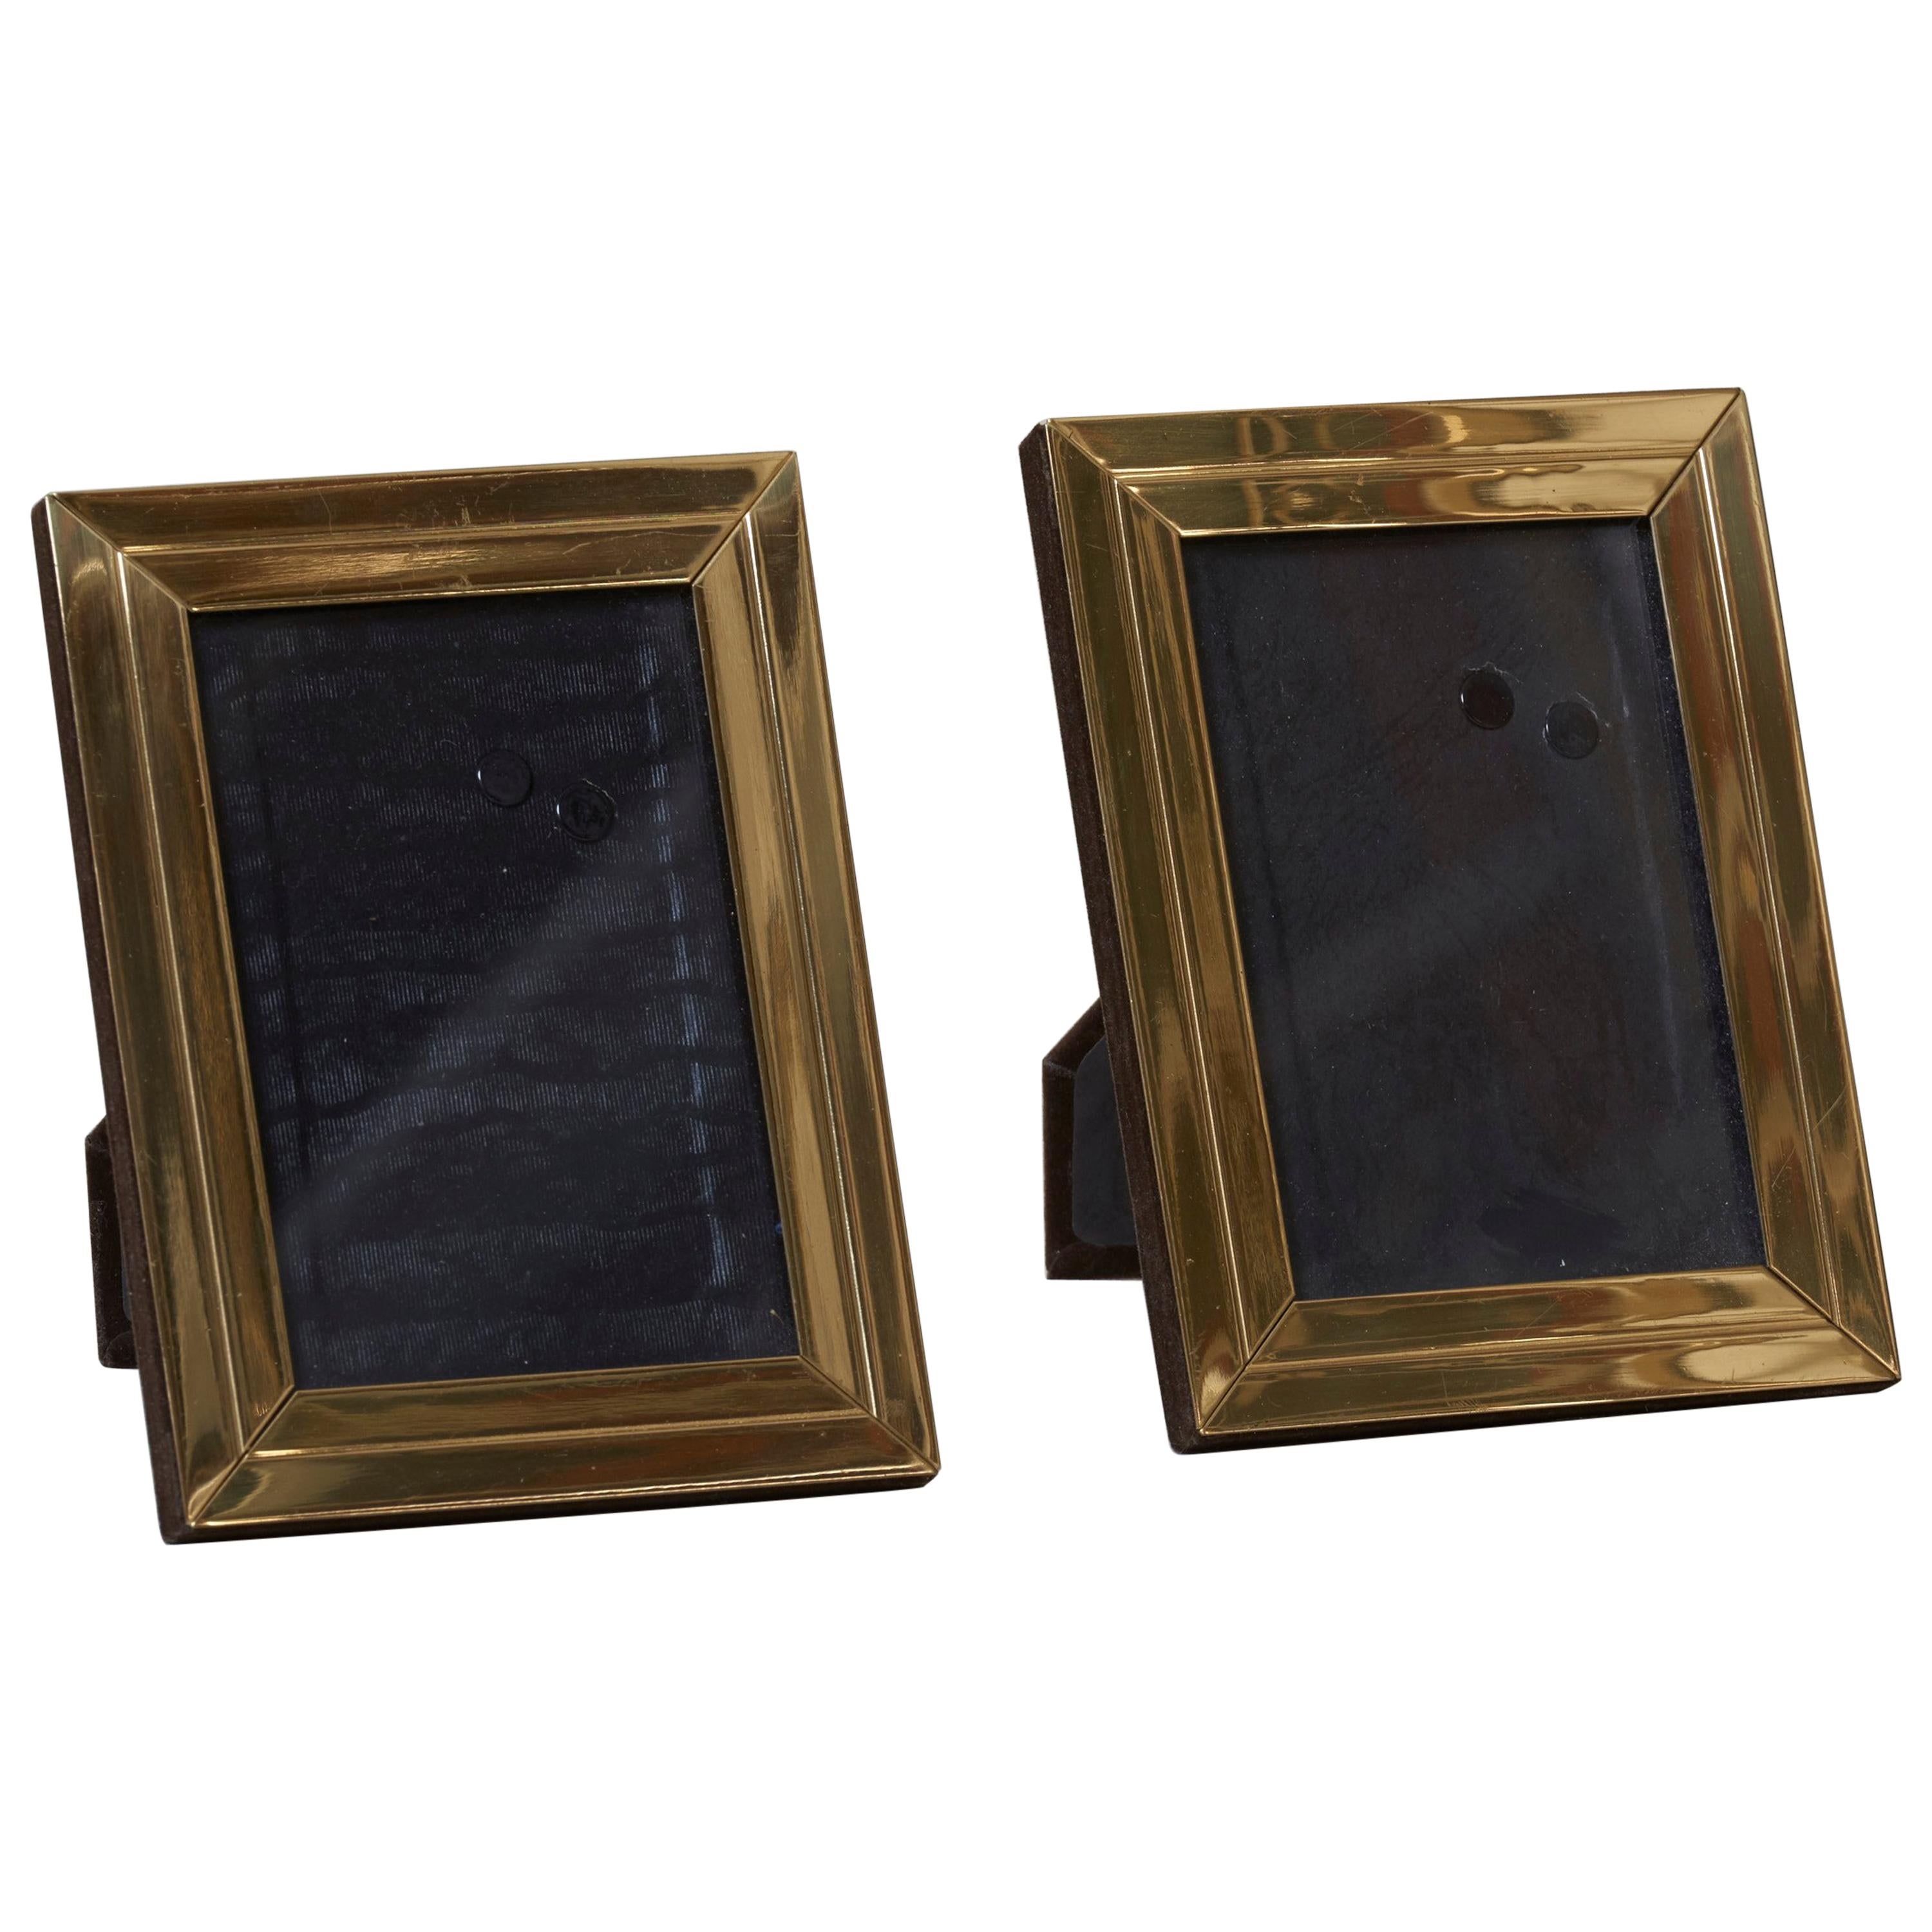 Two Modernist Brass Picture Photo Frames Attributed to Willy Rizzo